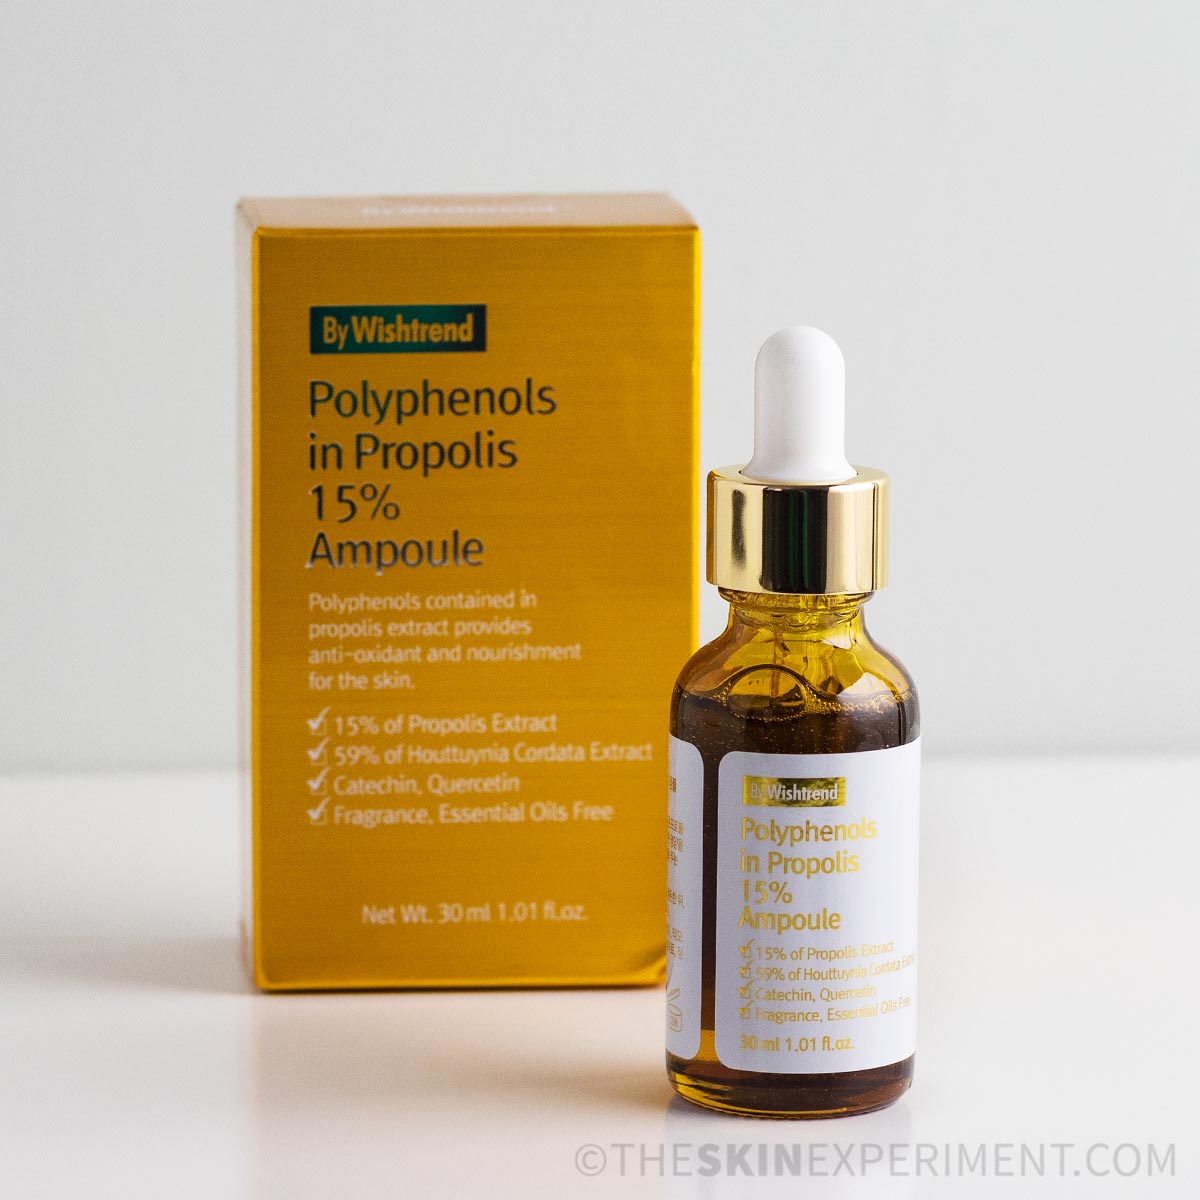 By Wishtrend Polyphenols in Propolis 15% Ampoule Review